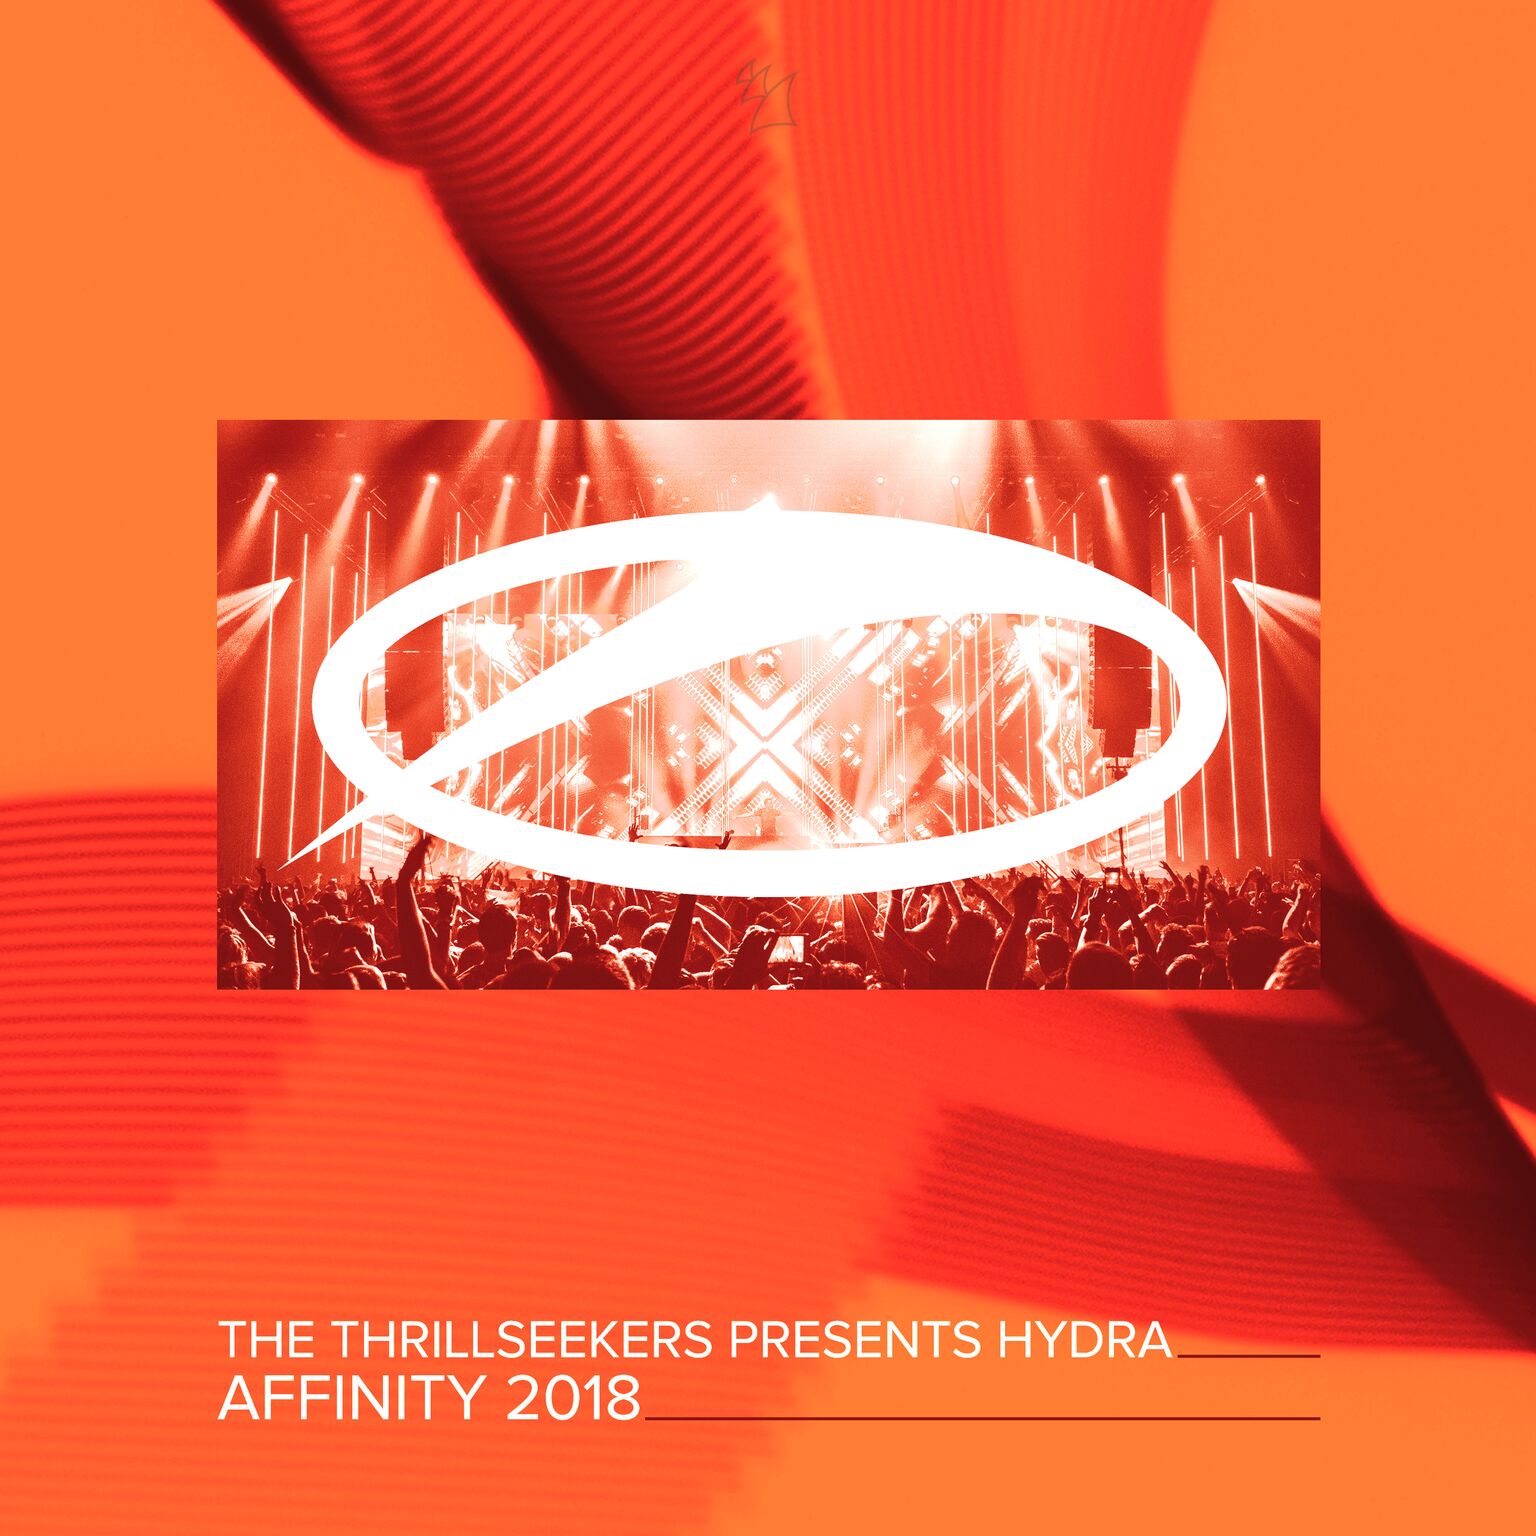 The Thrillseekers pres. Hydra - Affinity 2018